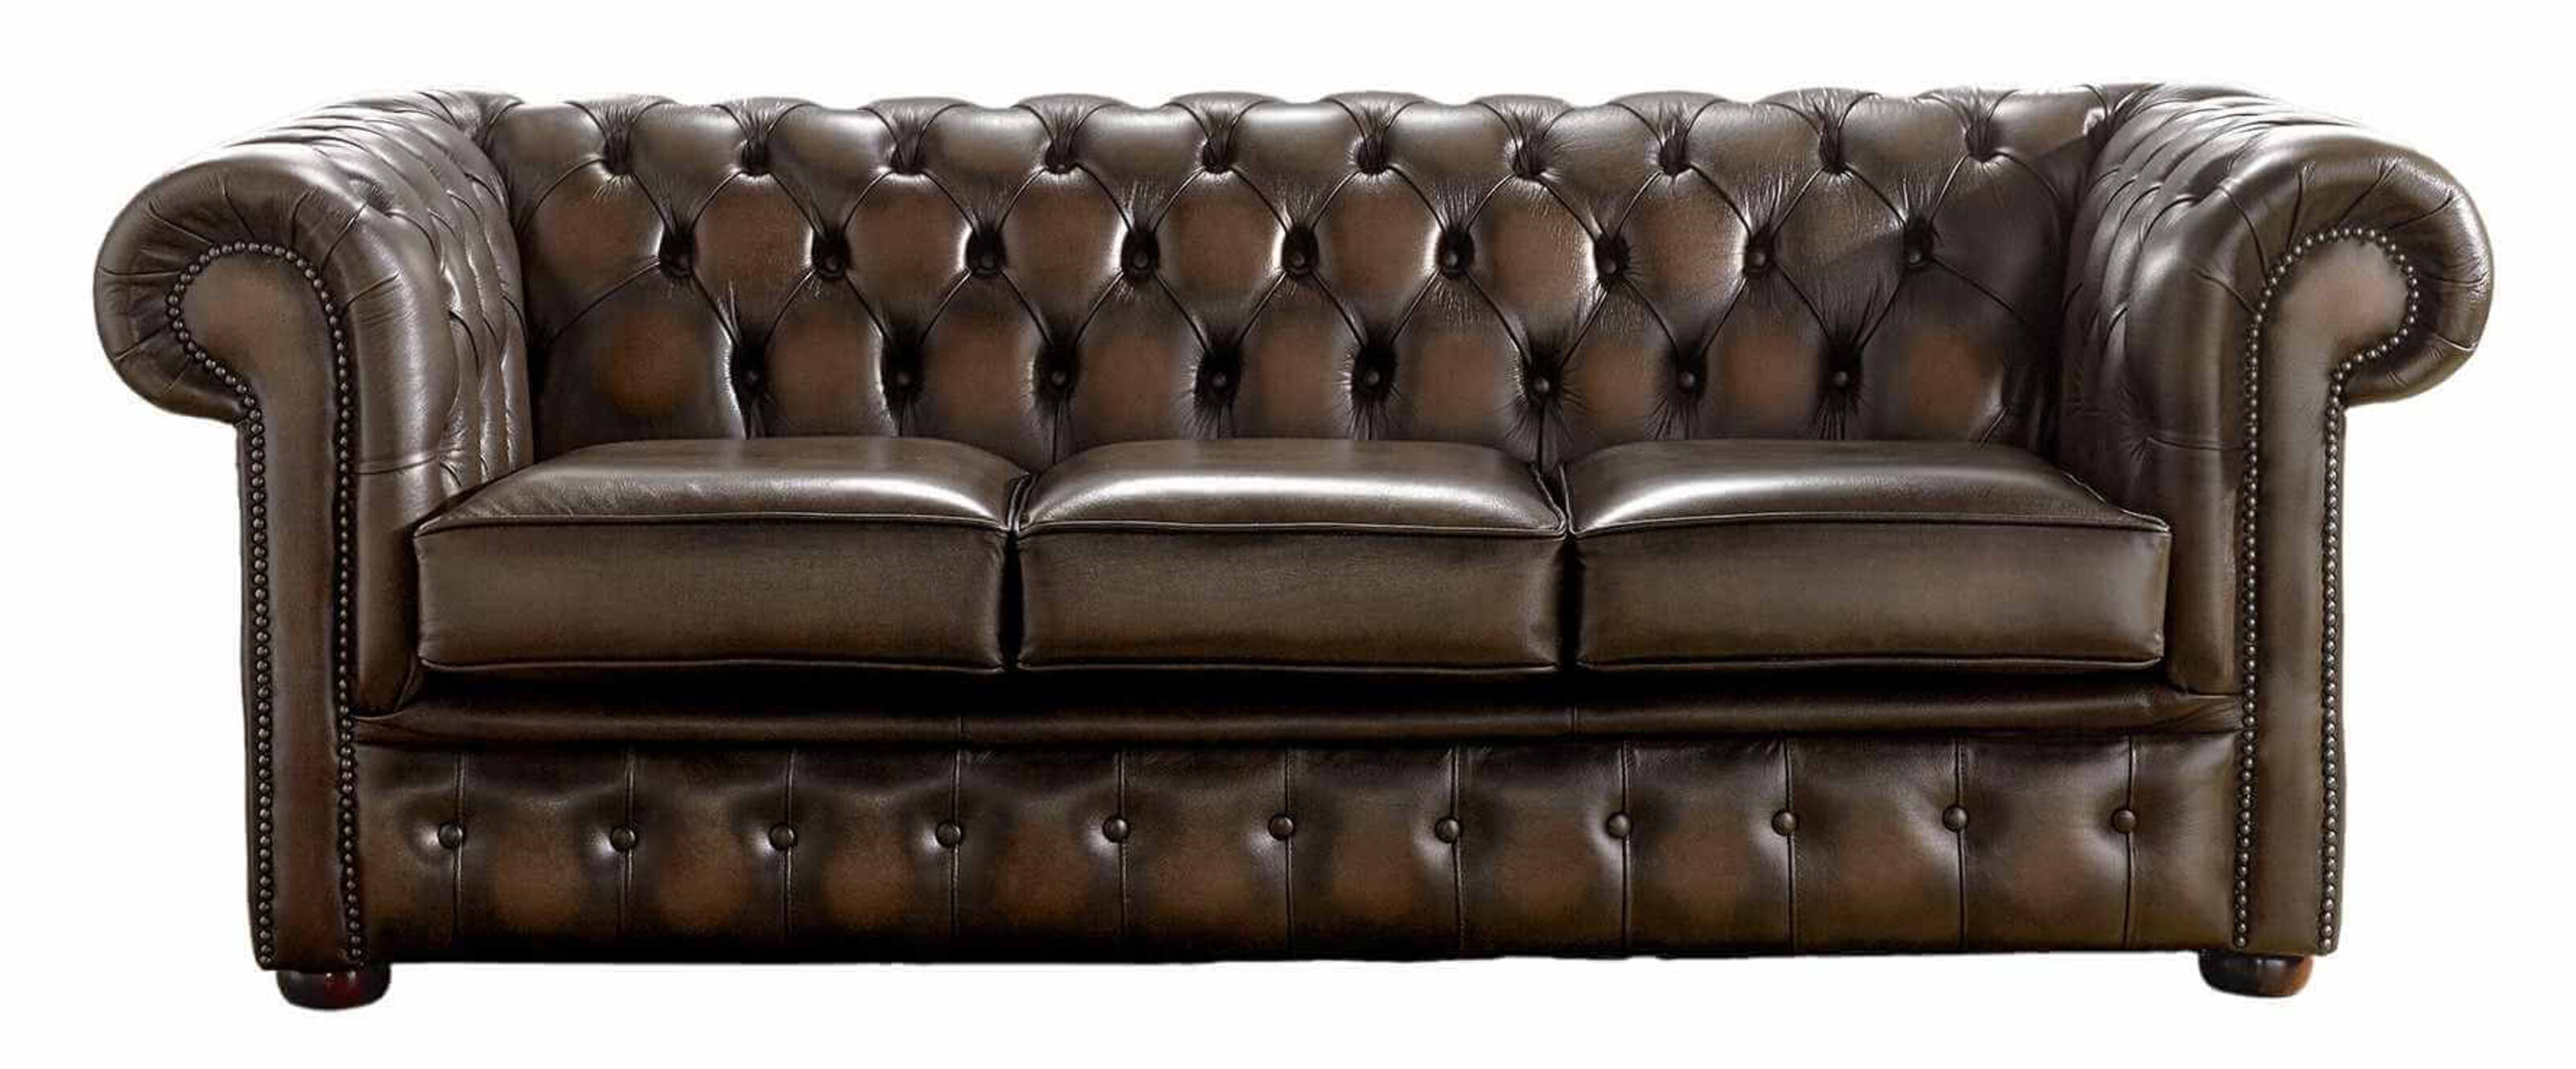 Classic or Contemporary Revisiting the Chesterfield Sofa's Style  %Post Title